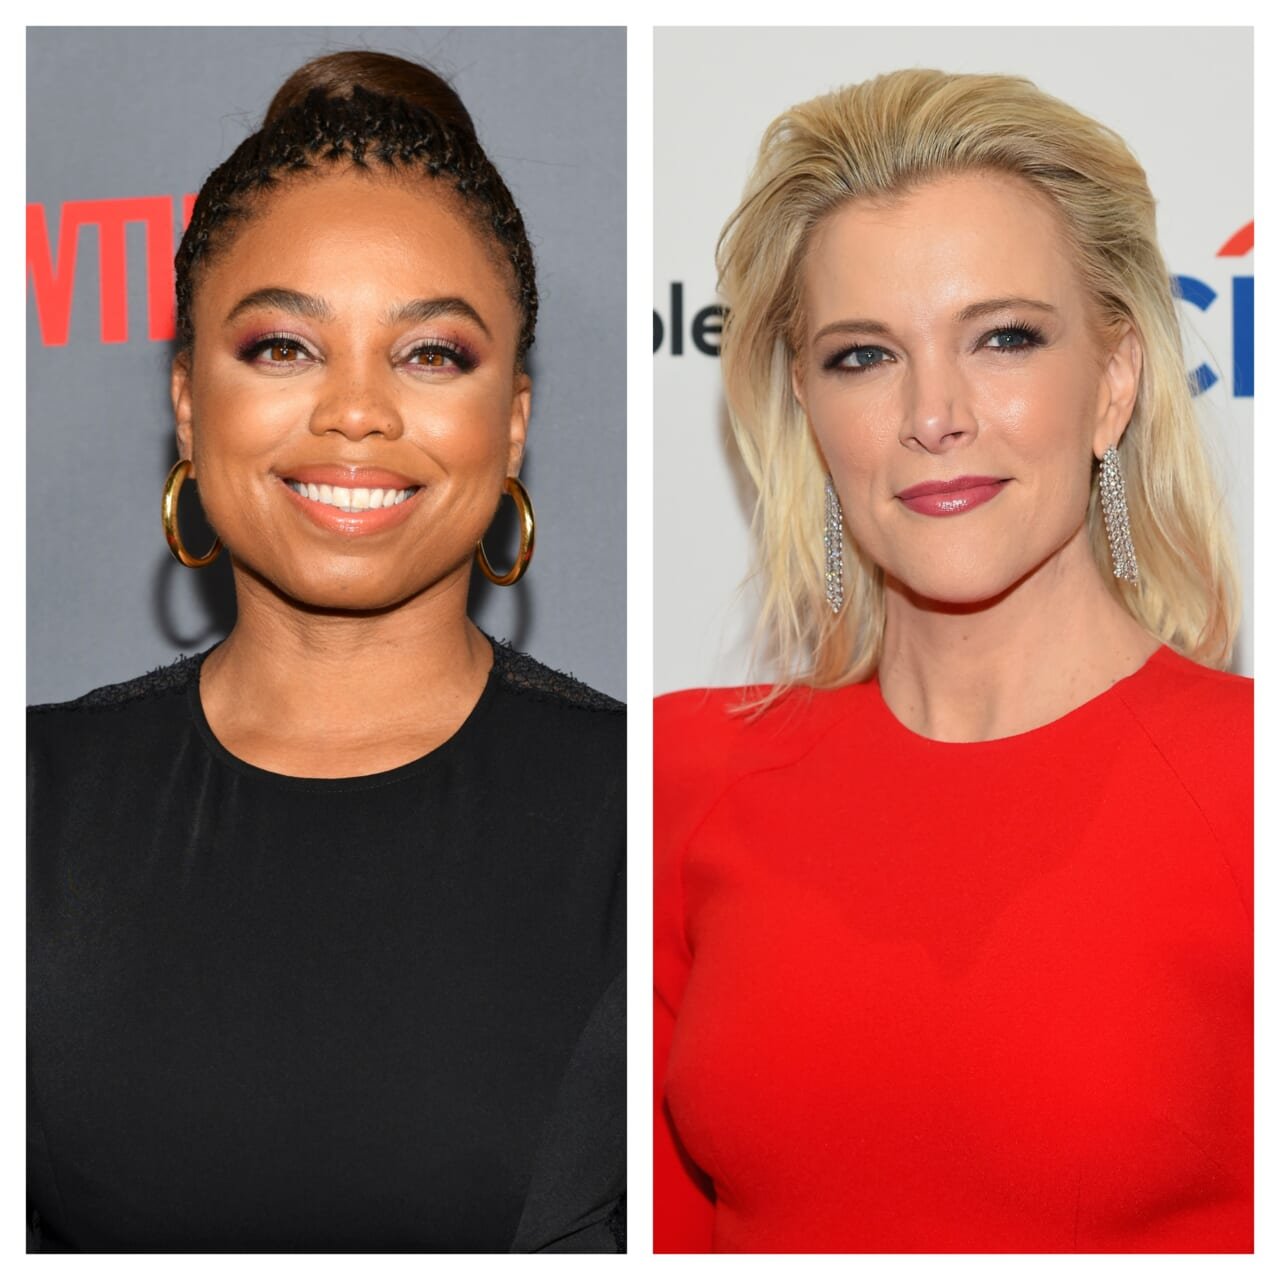 'Pray to white Jesus': Jemele Hill and Megyn Kelly clash over noose